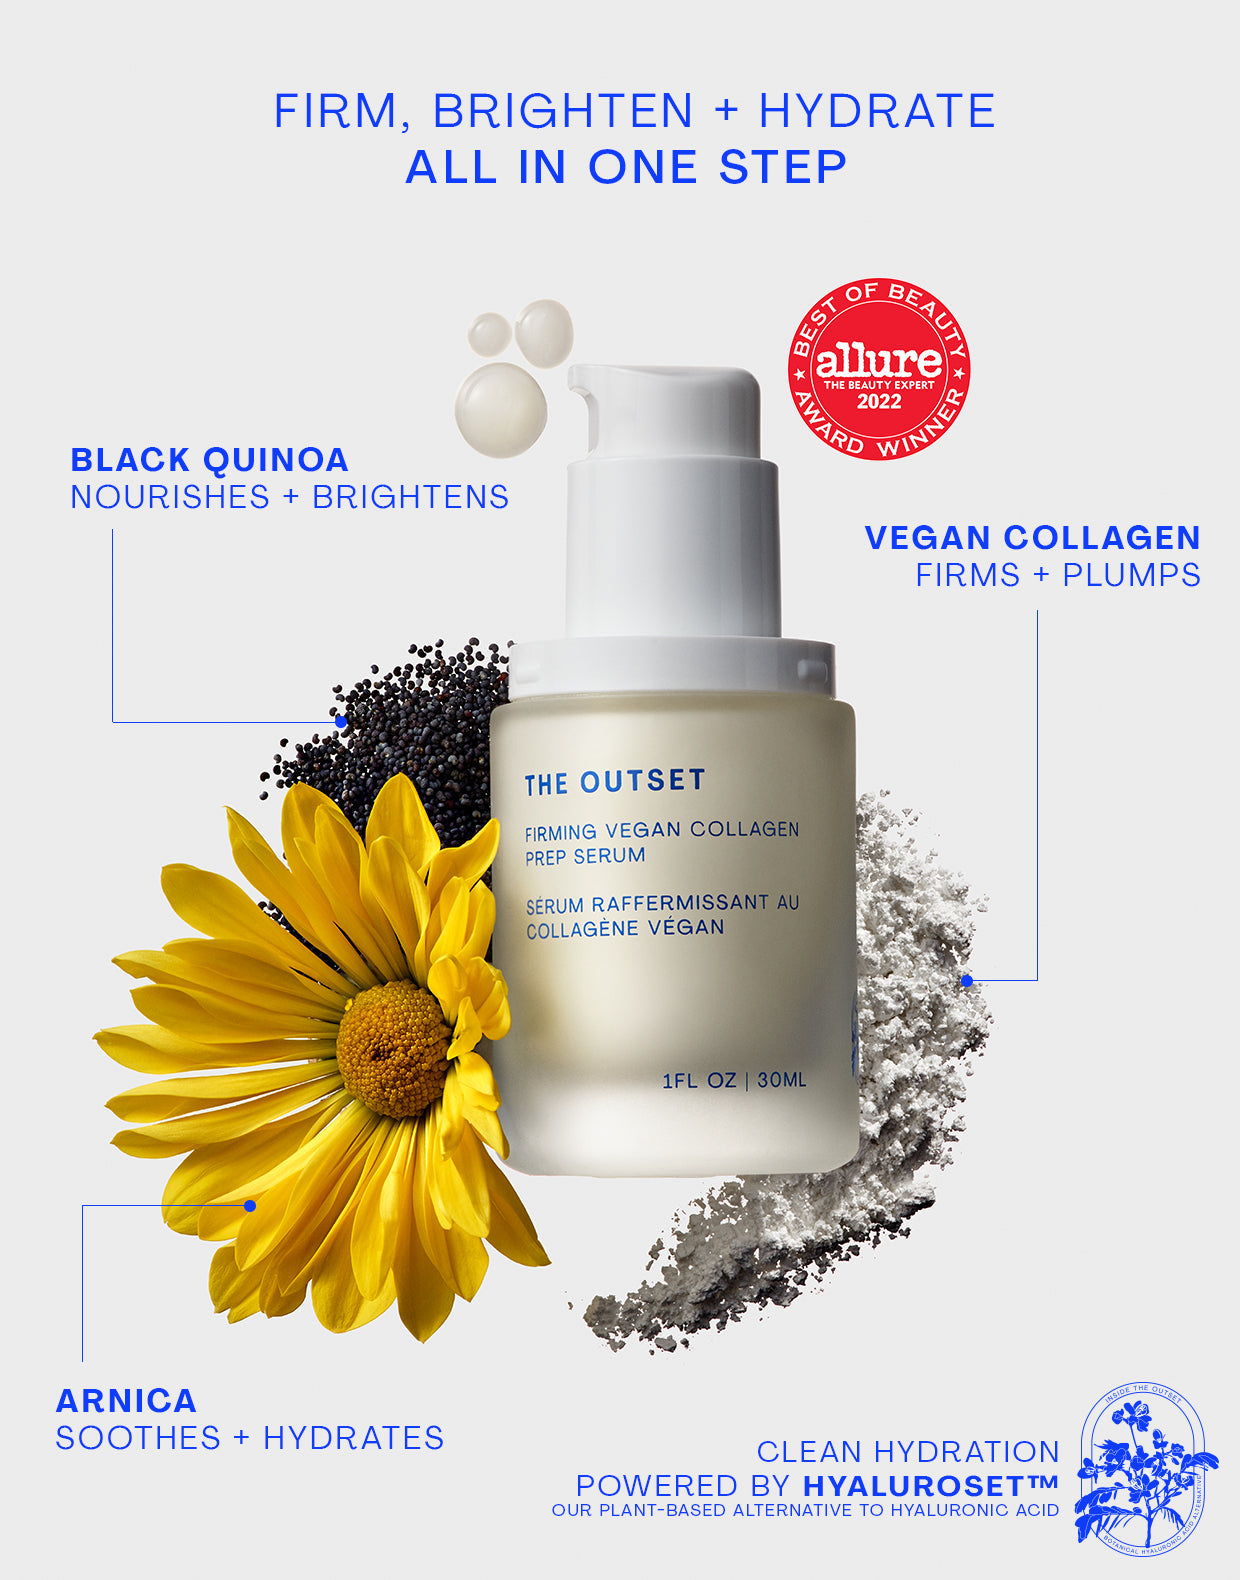 Photo of The Outset prep serum with ingredients and 2022 Allure best of beauty seal. Firm, Brighten & Hydrate all in one step; black quinoa nourishes + brightens, vegan collagen firms + Plumps, arnica soothes + hydrates. Hyaluroset stamp with text clean hydration powered by hyaluroset(tm), our plant-based alternative to hyaluronic acid